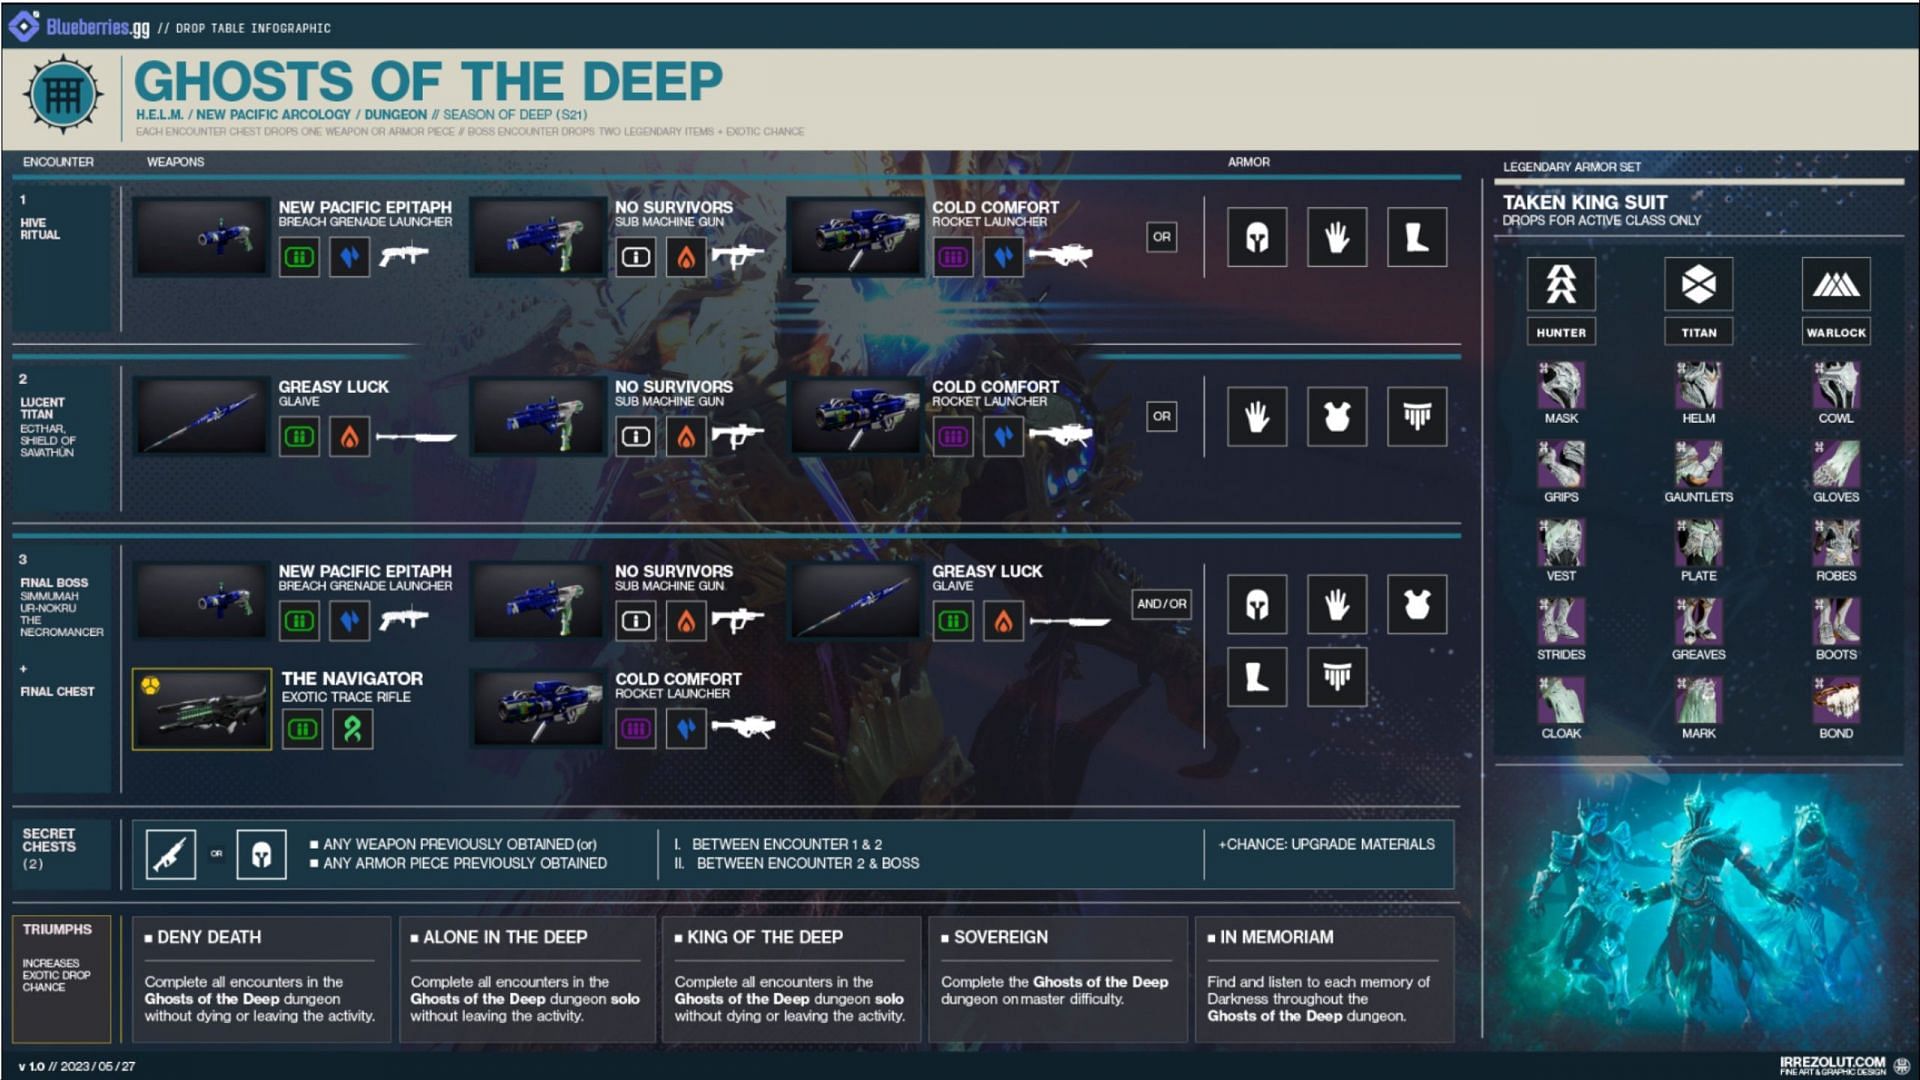 The encounter-wise loot table in Ghosts of the Deep dungeon in Destiny 2 (Image via Bllueberries.gg)